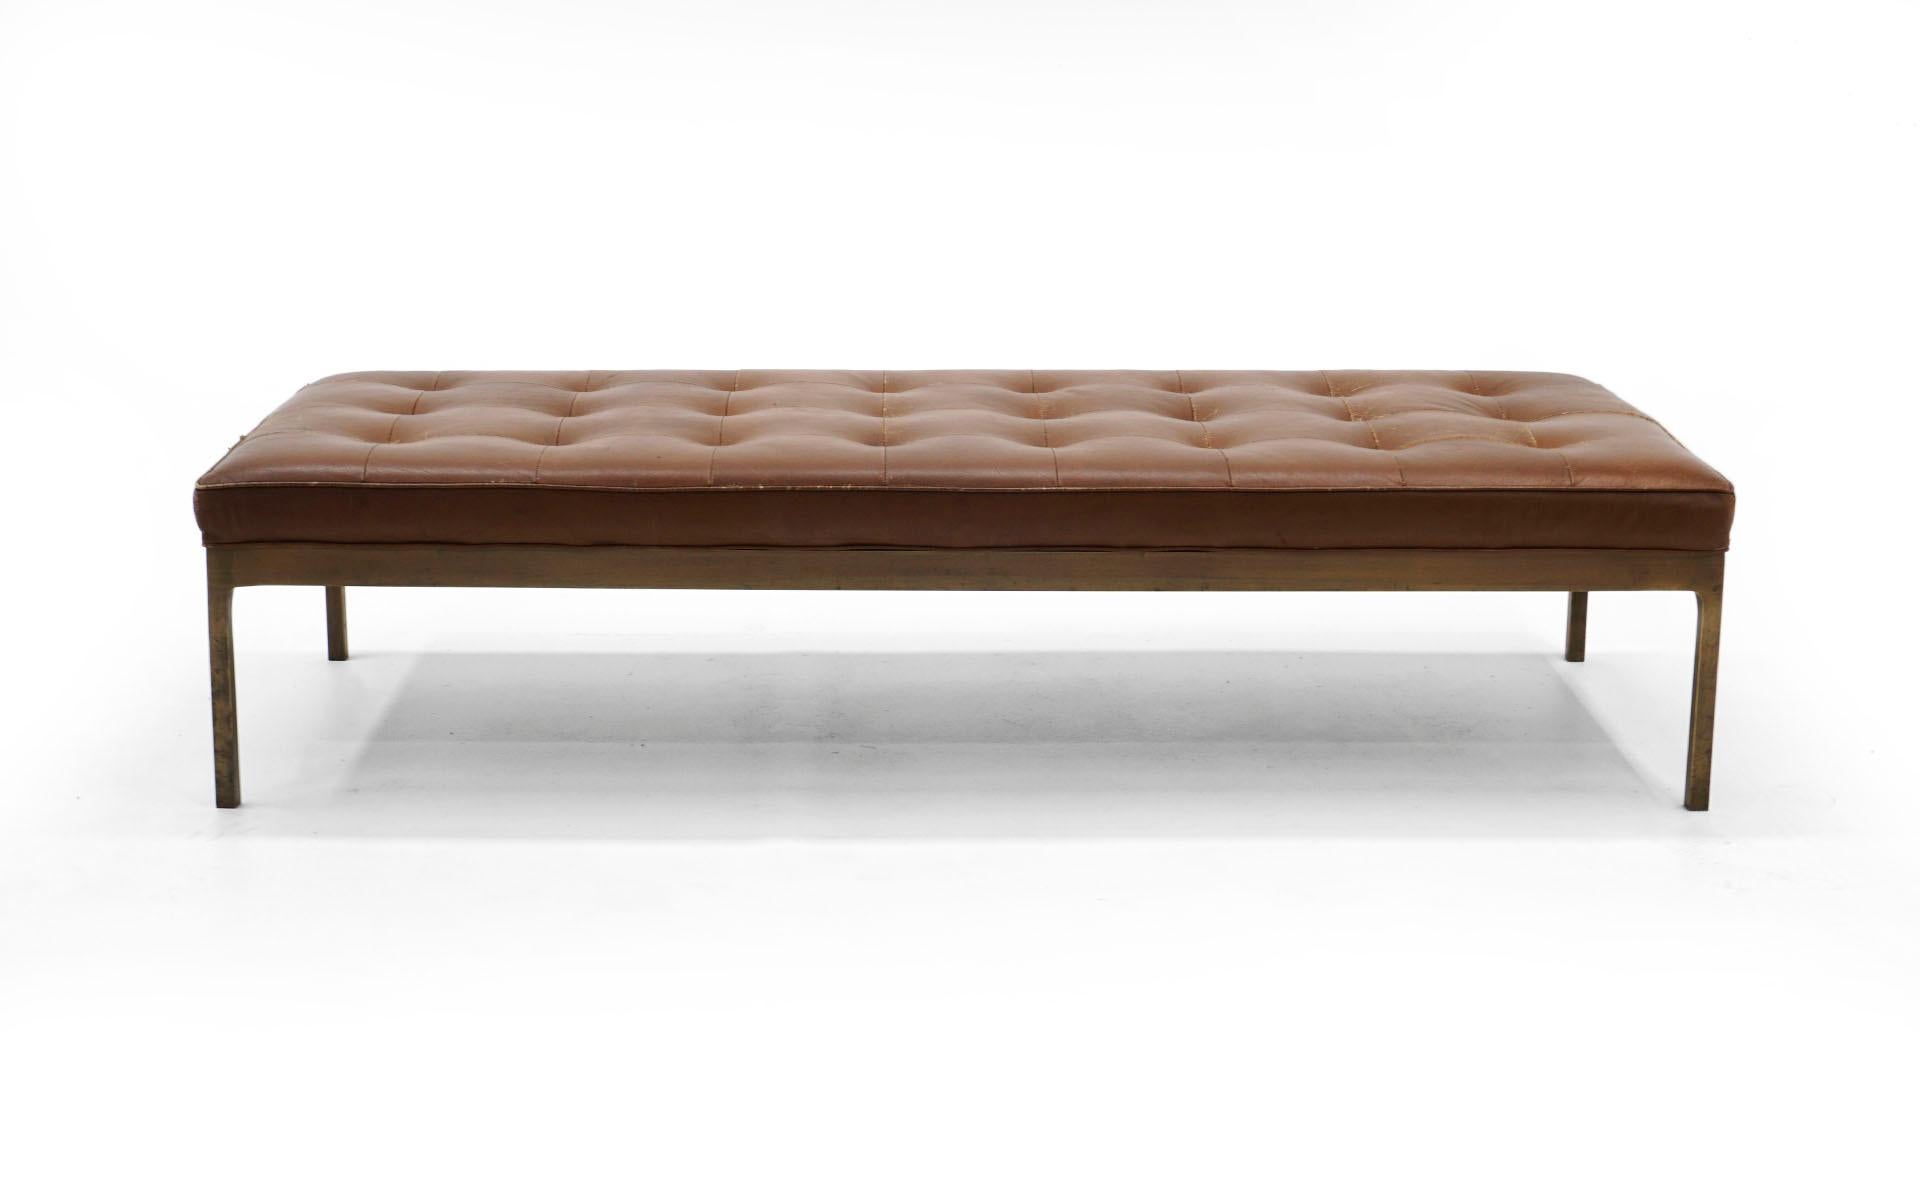 All original bronze frame leather museum bench / daybed designed by Nico Zographos. Beautifully patinated solid bronze frame with the original brown leather in good condition with no tears or holes. We had the bench refoamed so it sits like new.